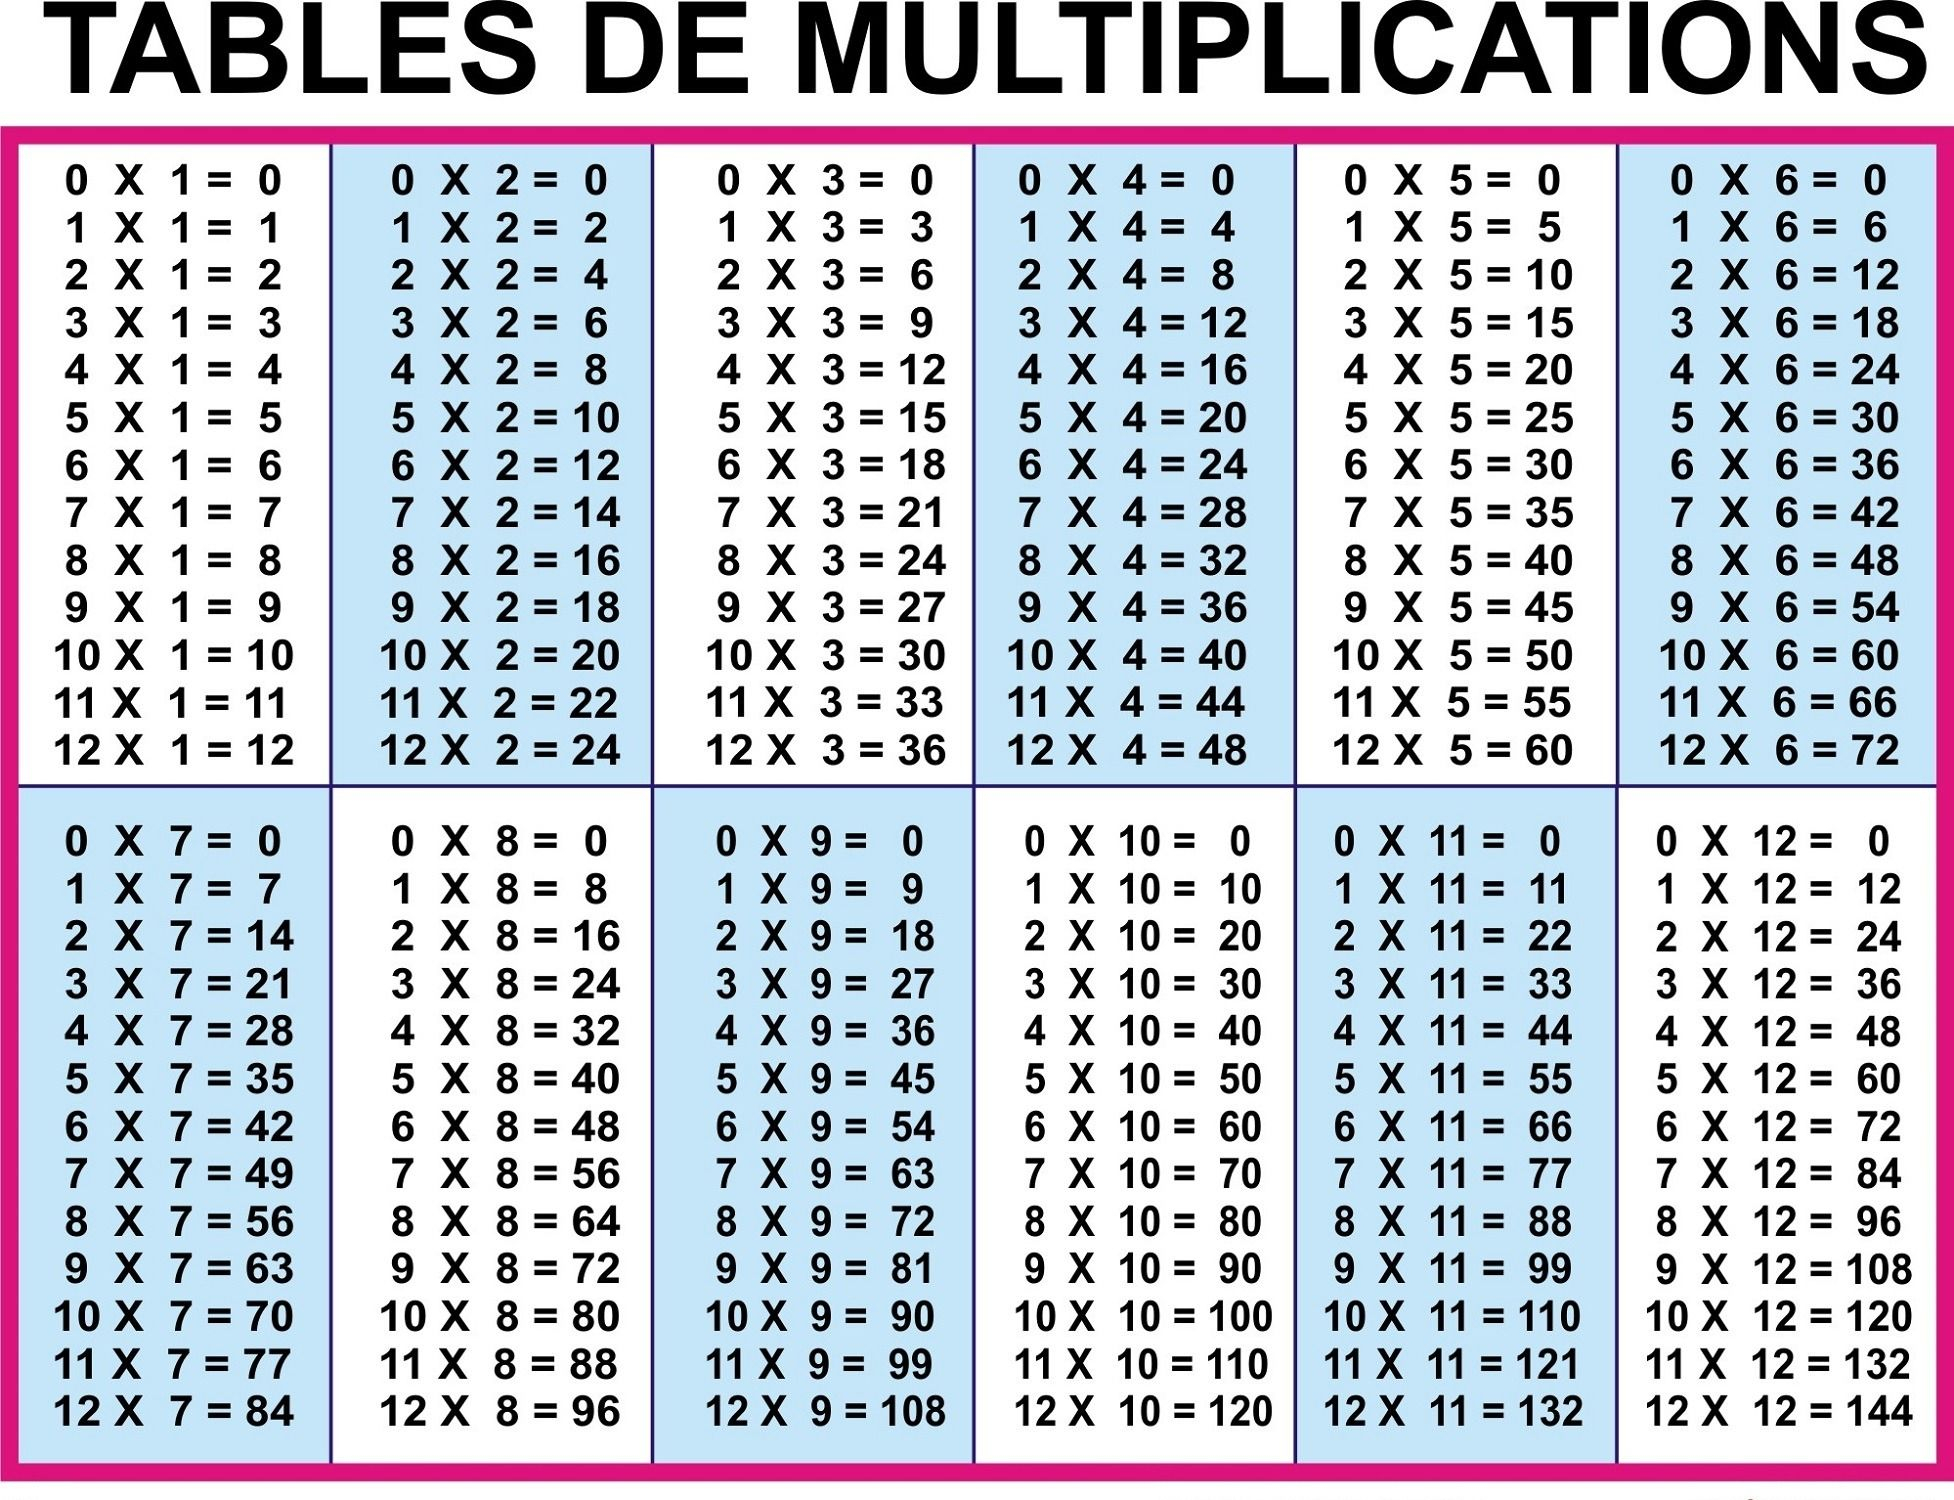 12 To 20 Multiplication Table | Multiplication Chart with Printable Multiplication Table 0-12